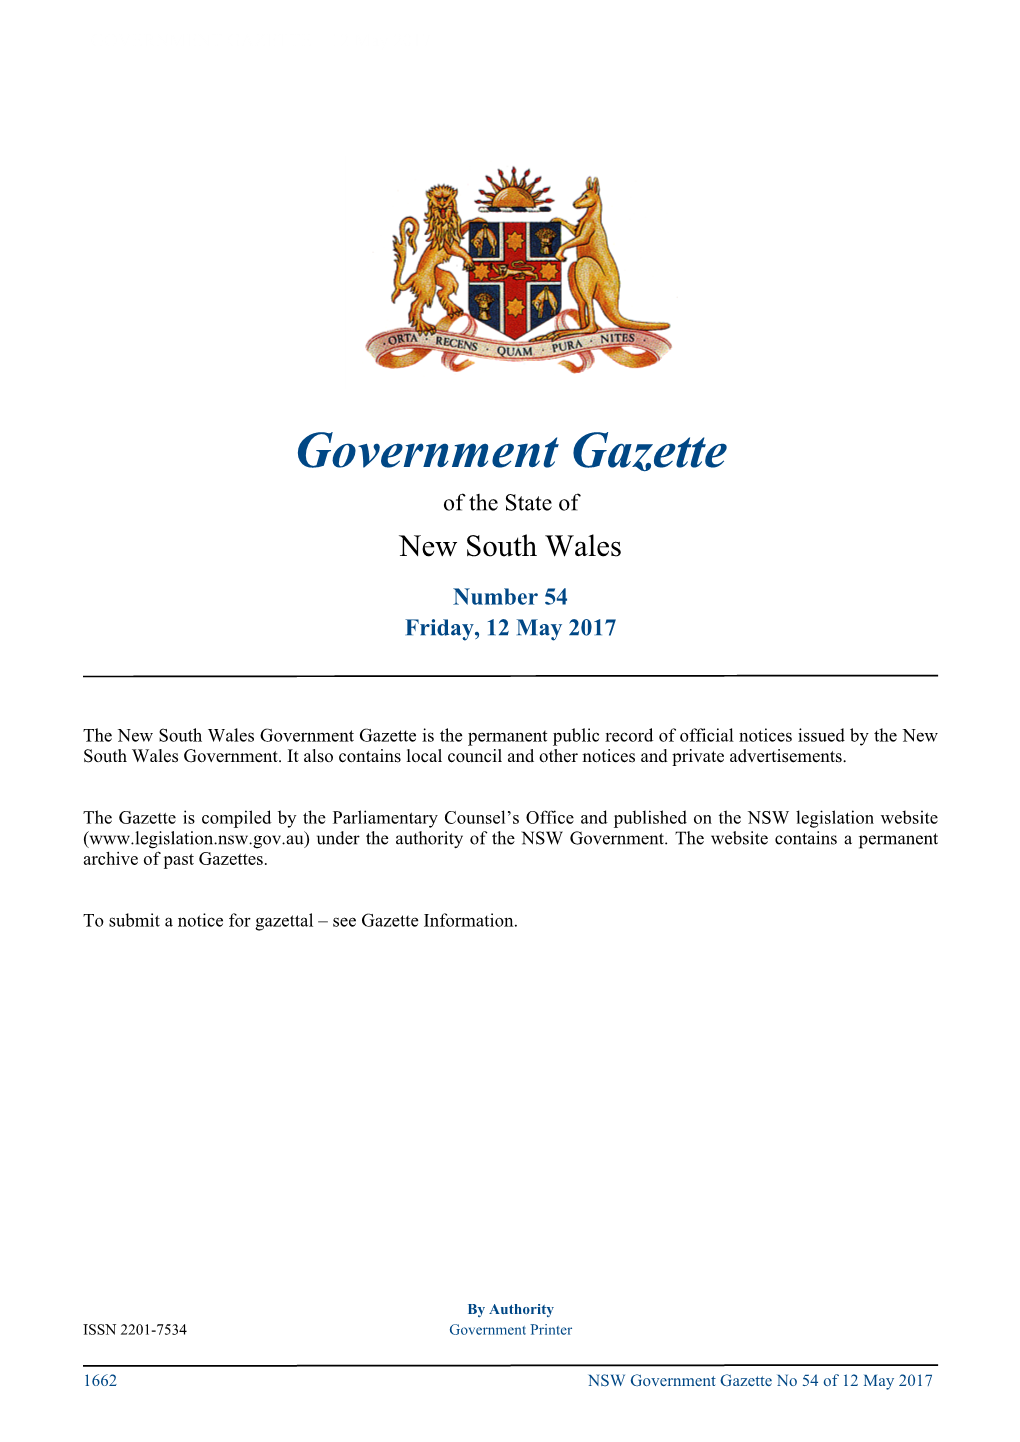 Government Gazette No 54 of 12 May 2017